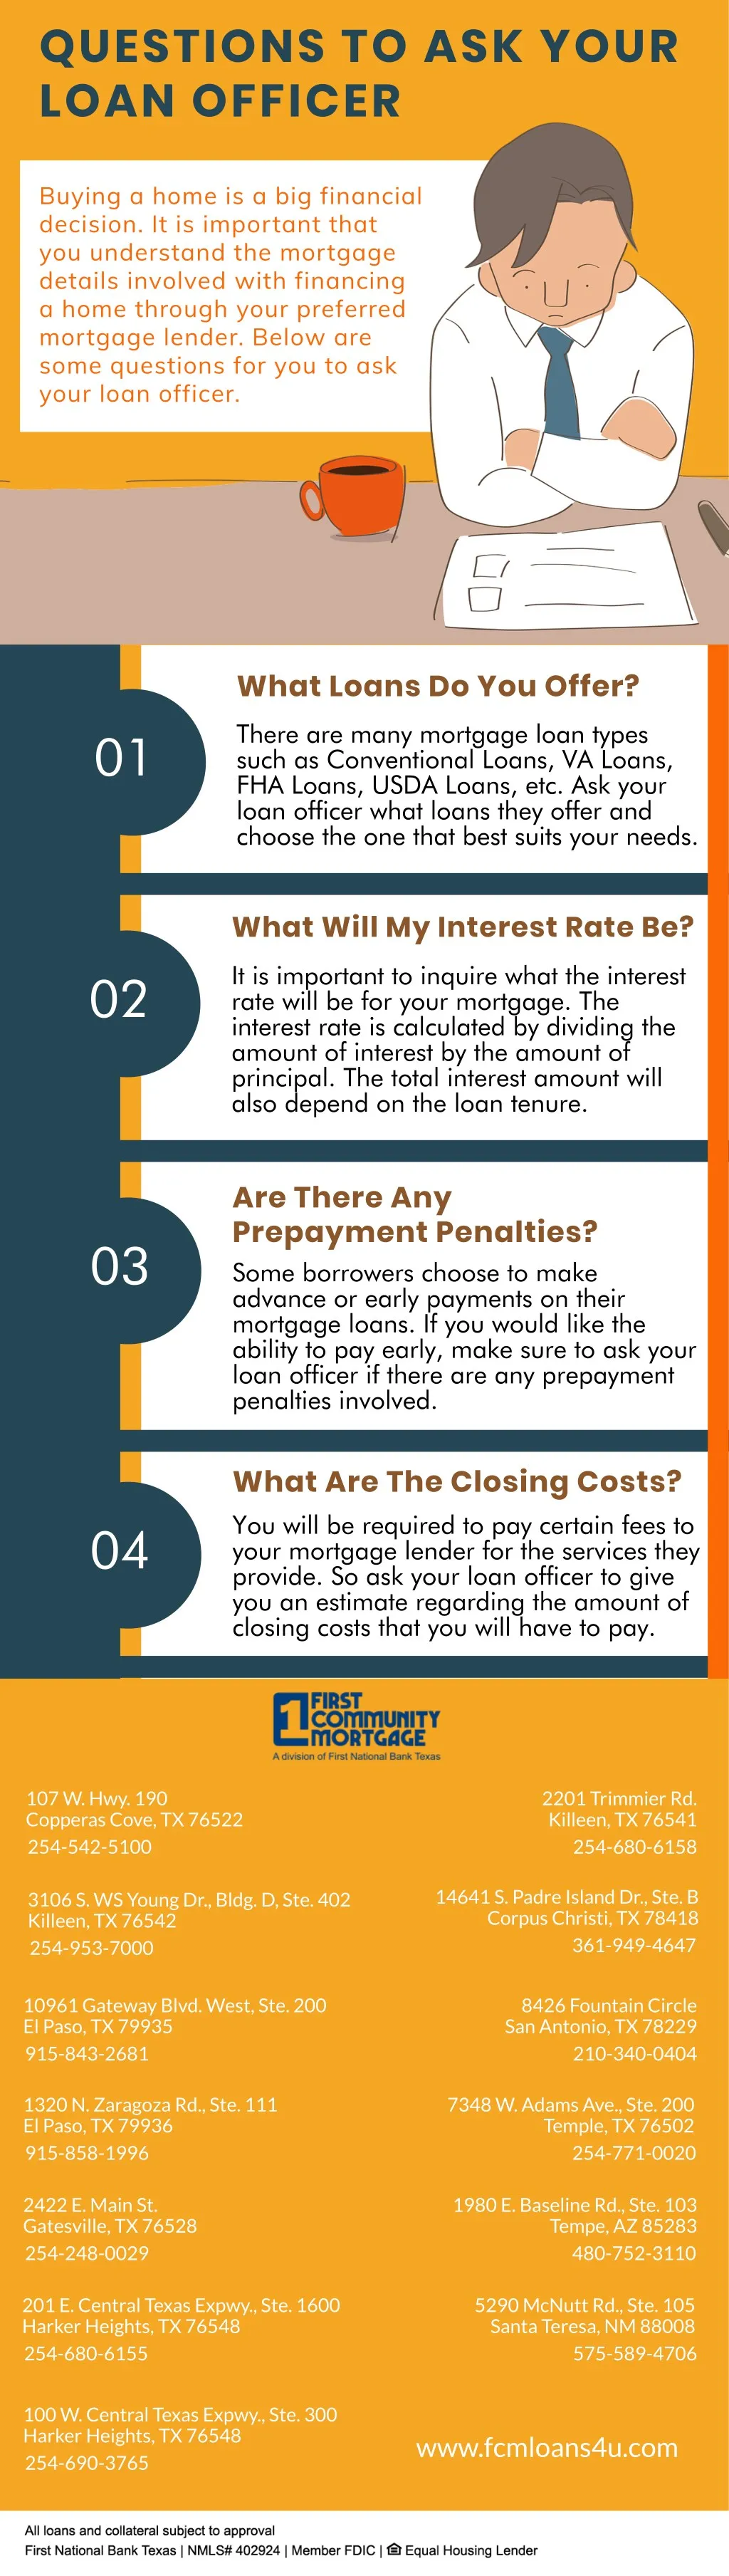 questions to ask your loan officer